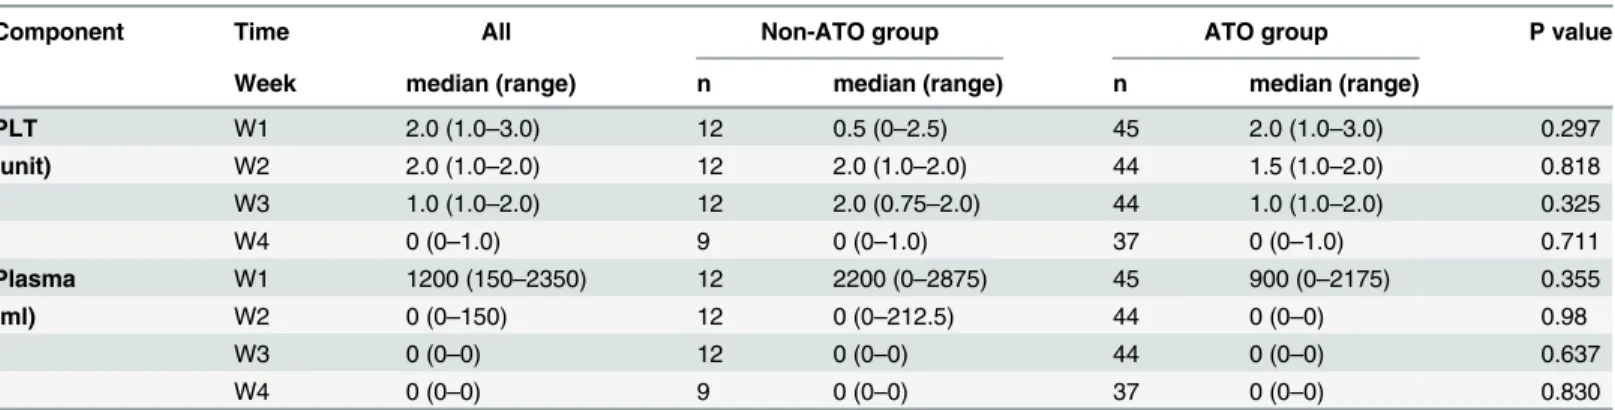 Table 5. Compared analysis of consumption of component blood between non-ATO group and ATO group.